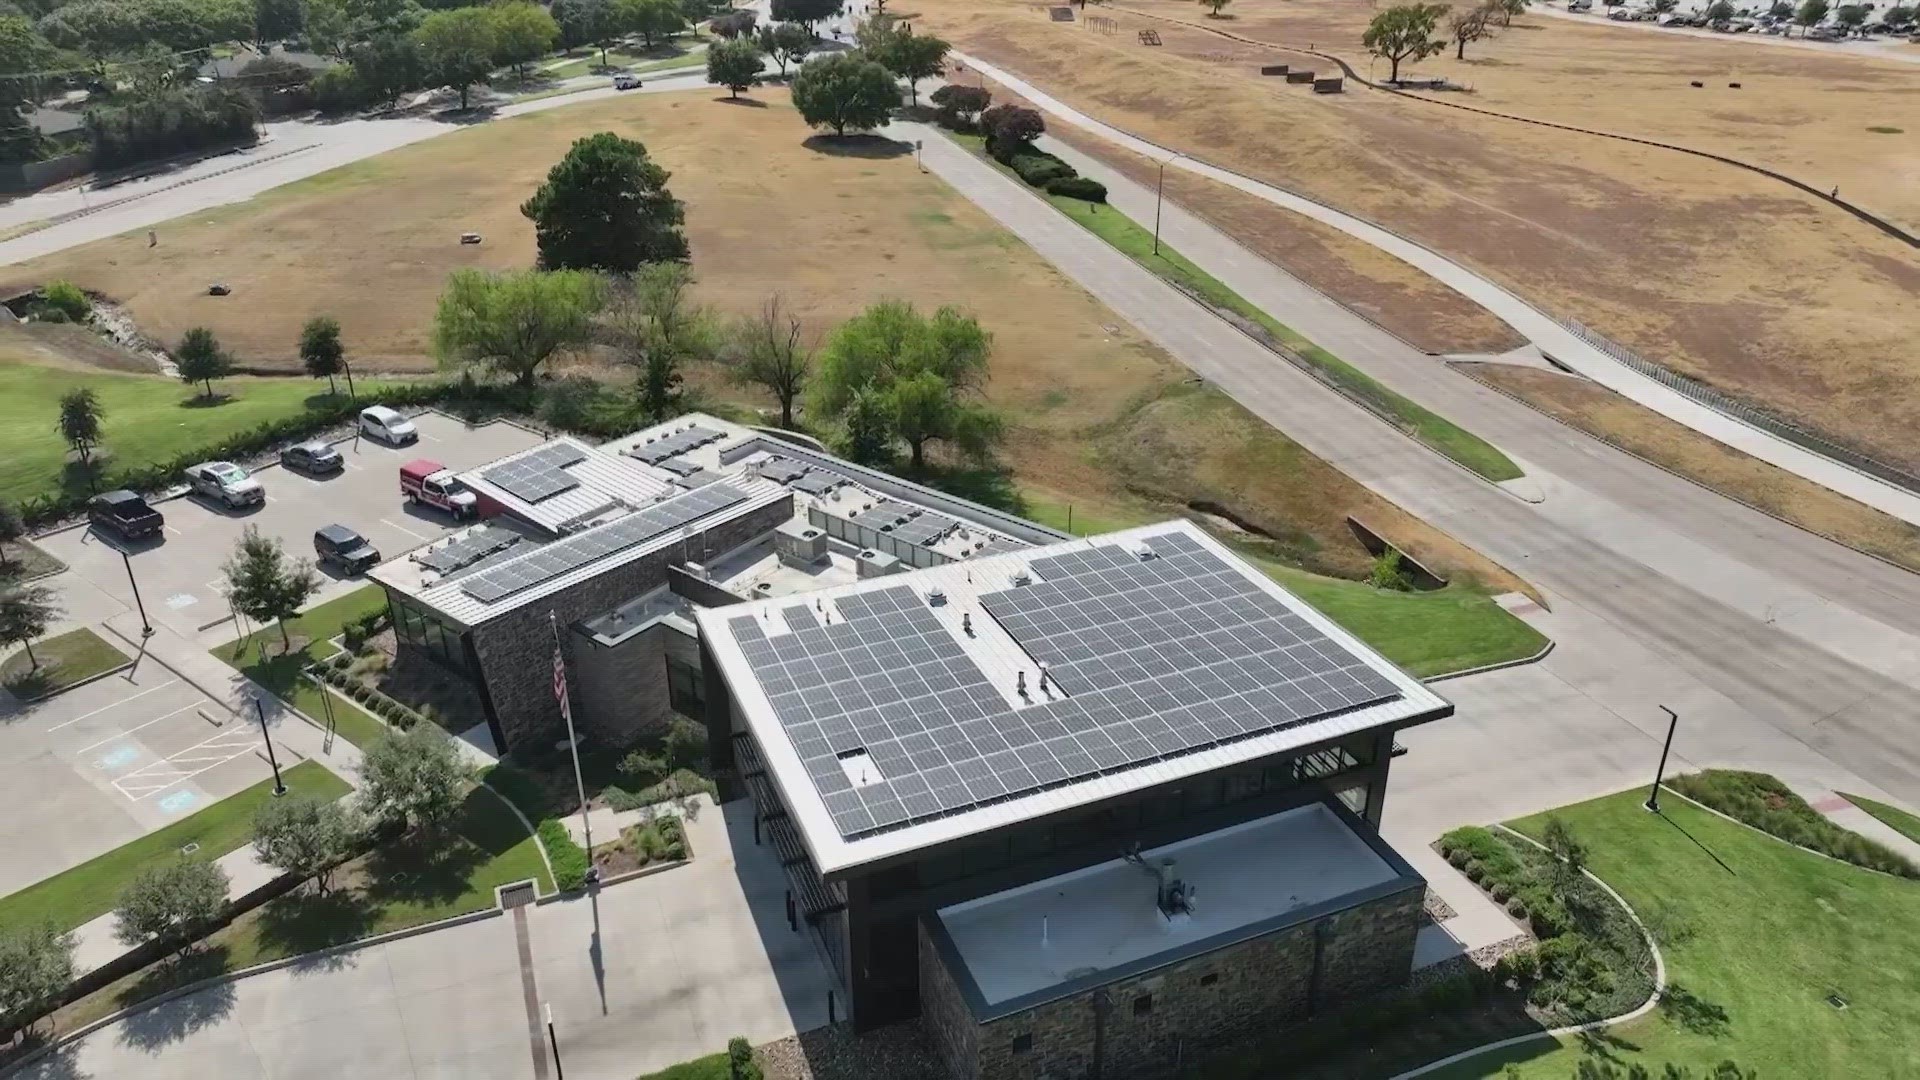 No other Texas city makes enough renewable energy inside its borders to fulfill its energy needs. The idea came up when Texas' grid went down.